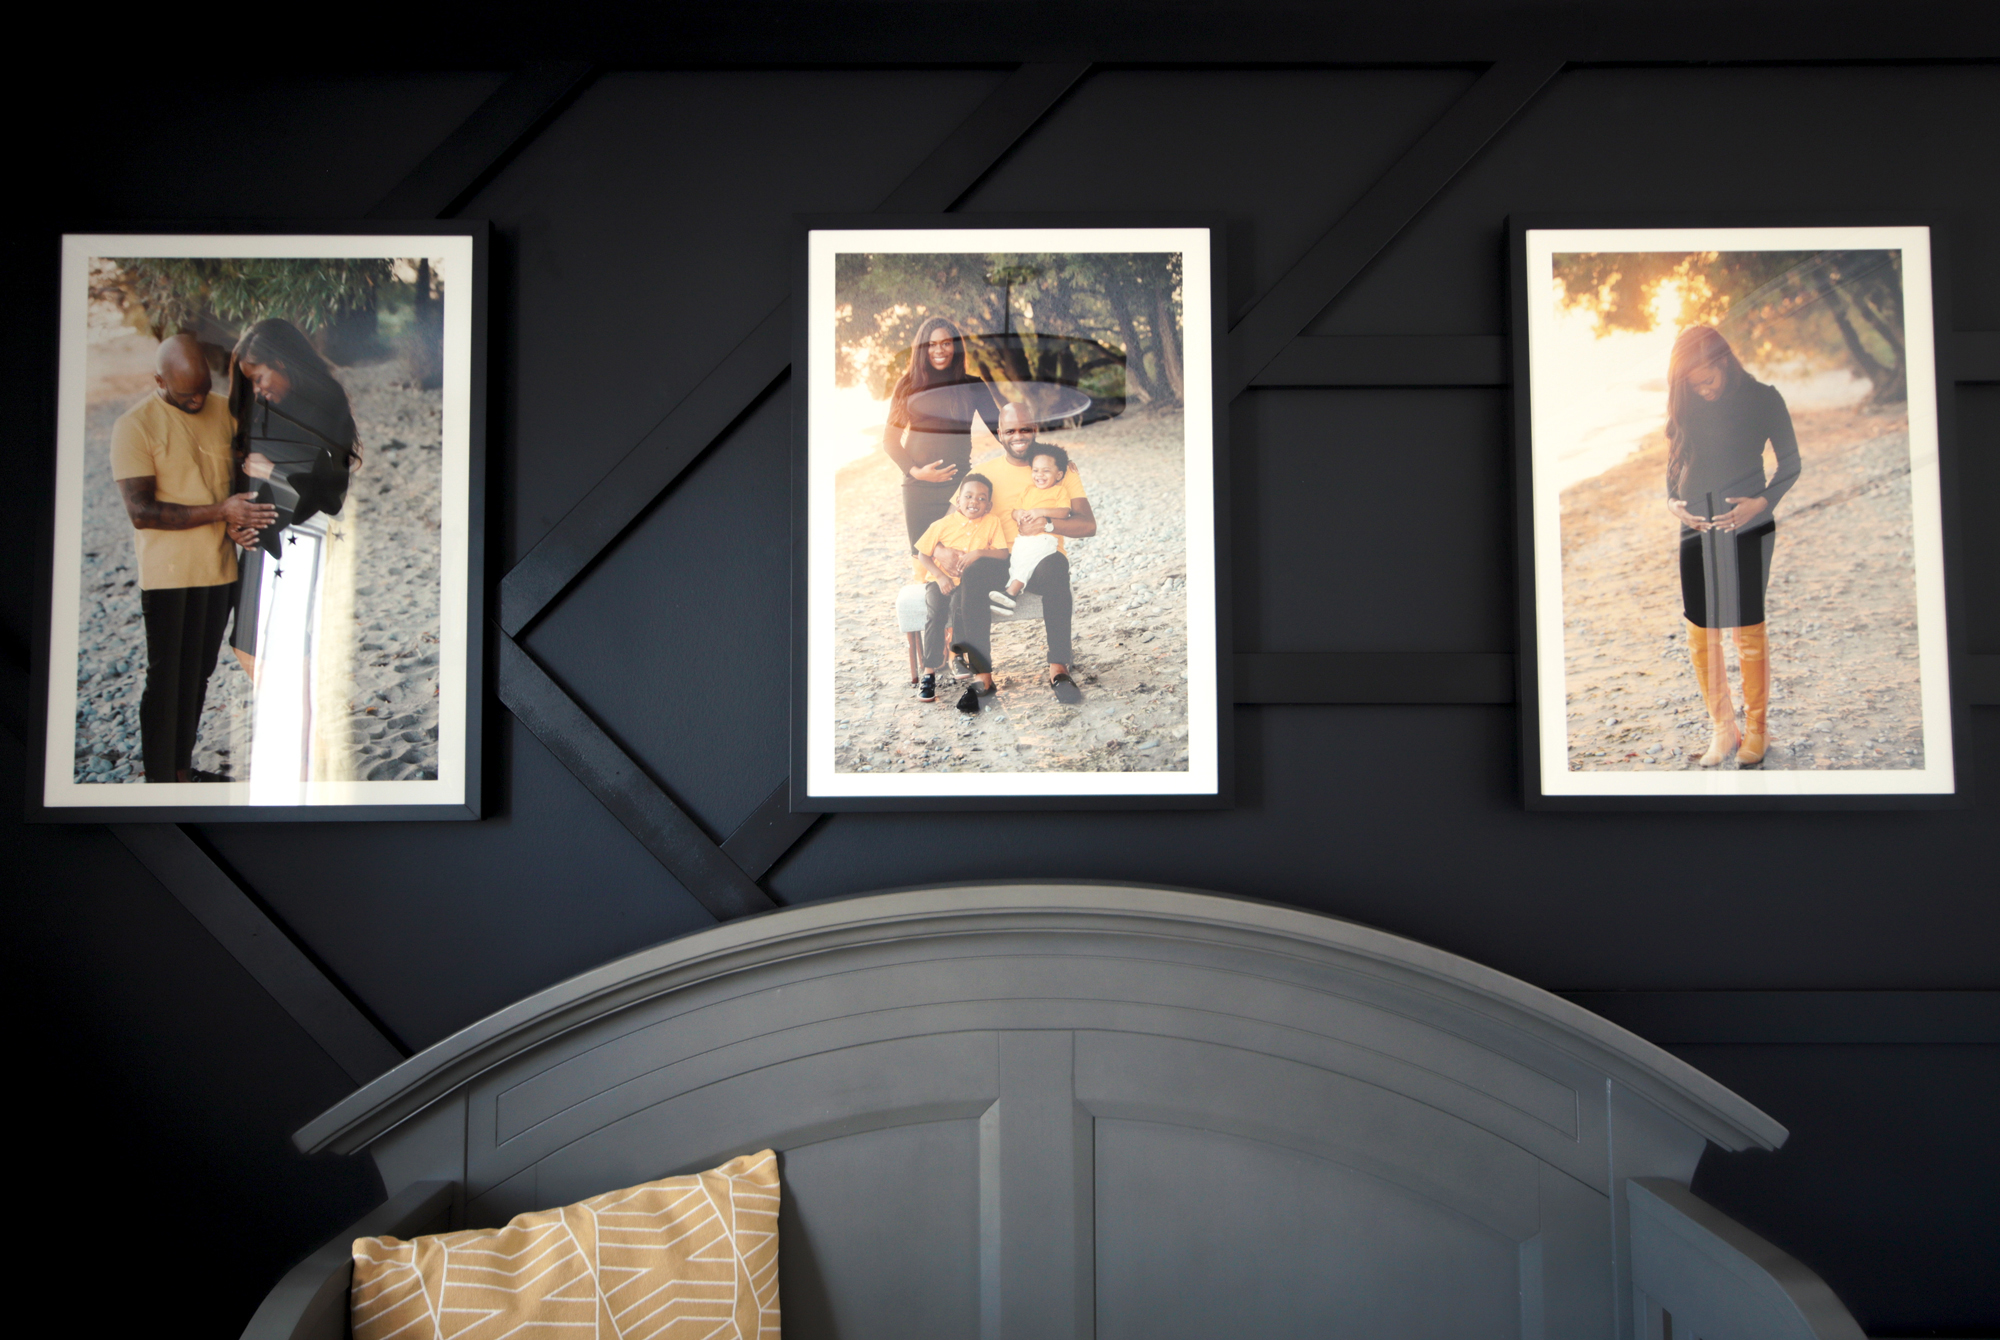 Oversized framed photo prints from Photowall provide the perfect focal point